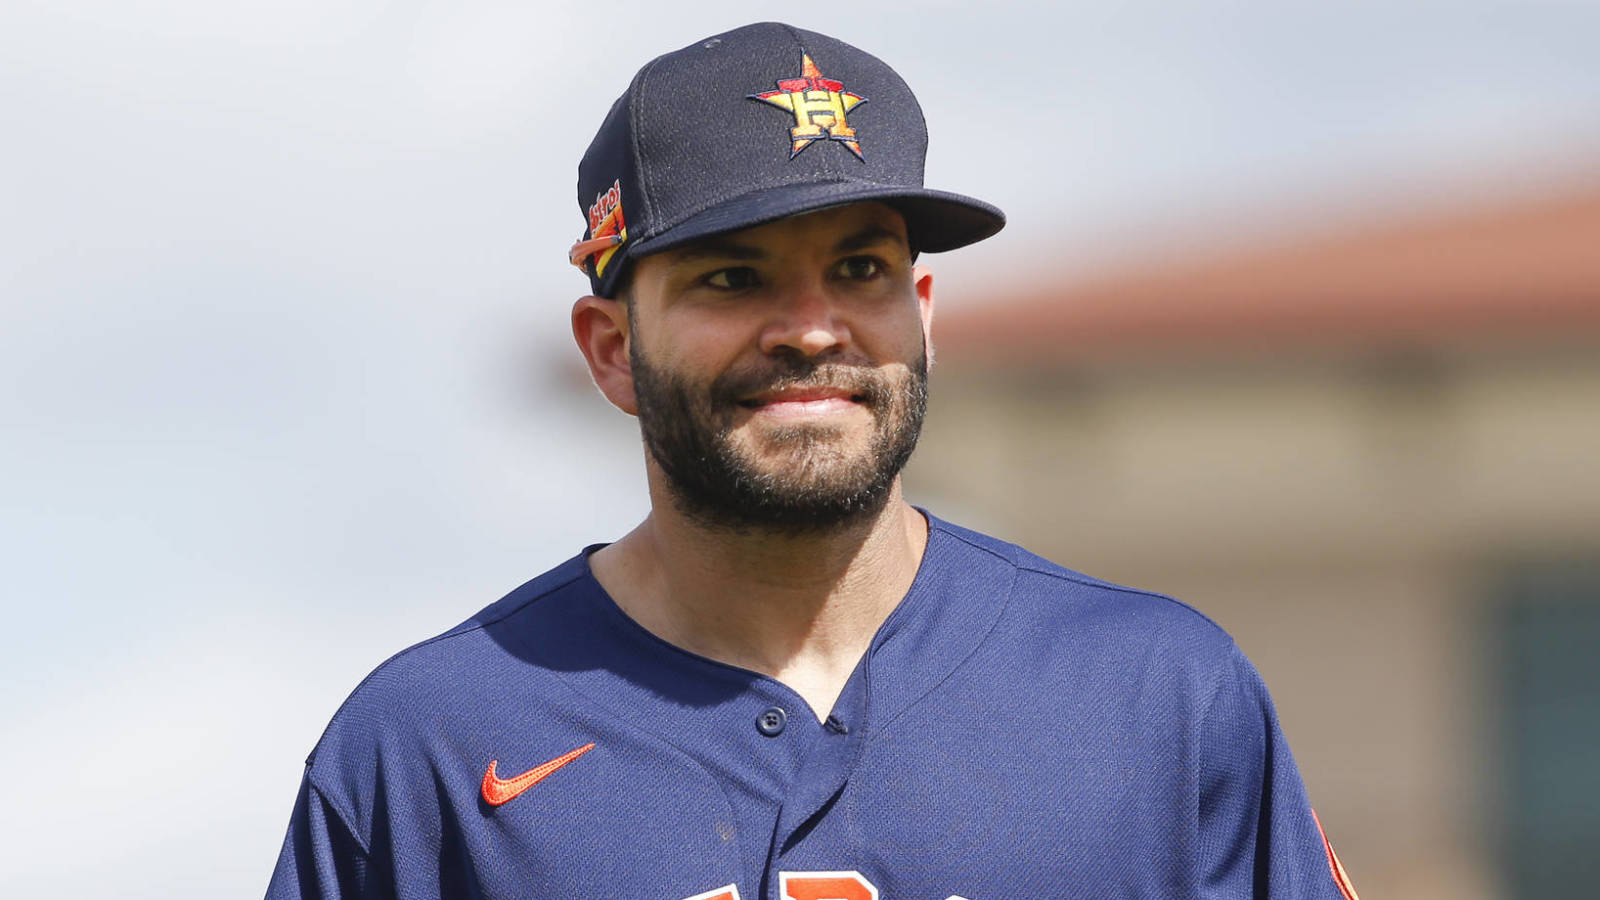 Astros' Jose Altuve shows off tattoo during spring training to